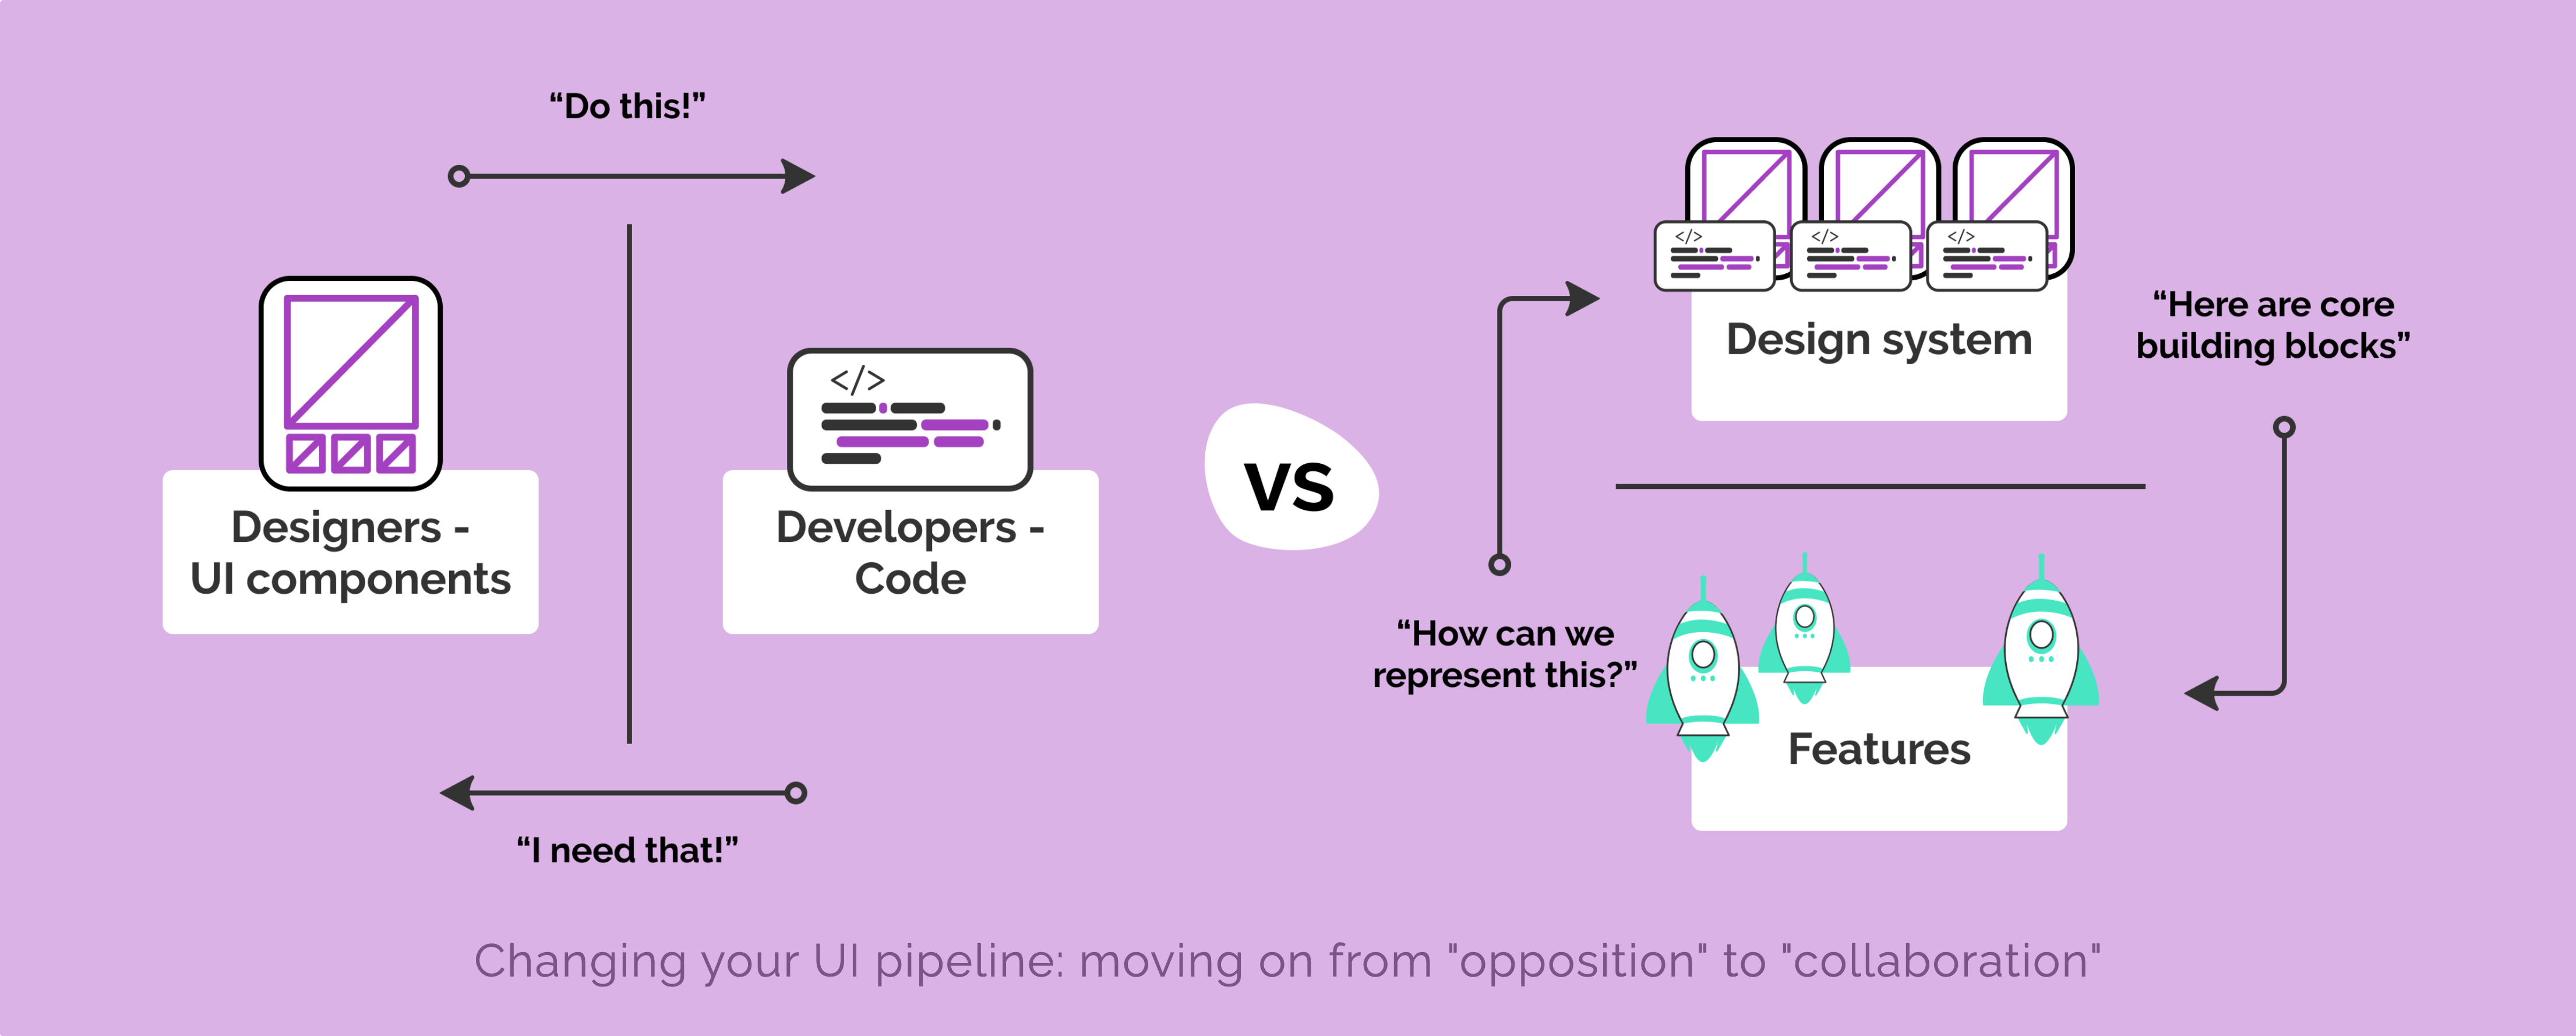 A diagram showing on one side an opposition between code and design, and on
the other a cycle between features and a Design
System